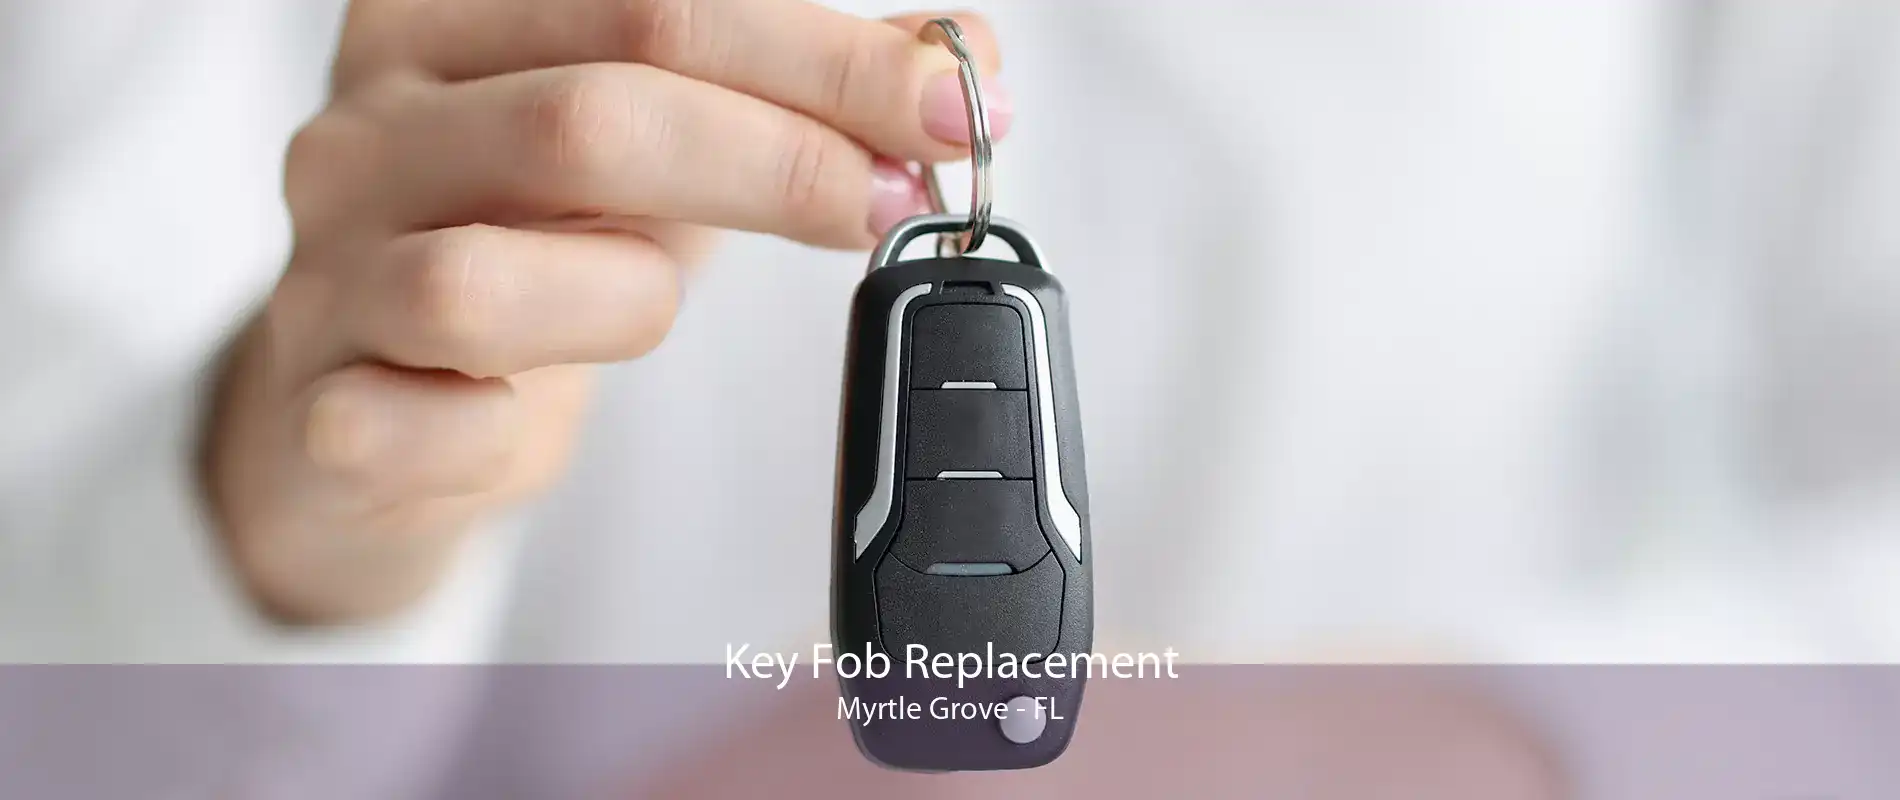 Key Fob Replacement Myrtle Grove - FL